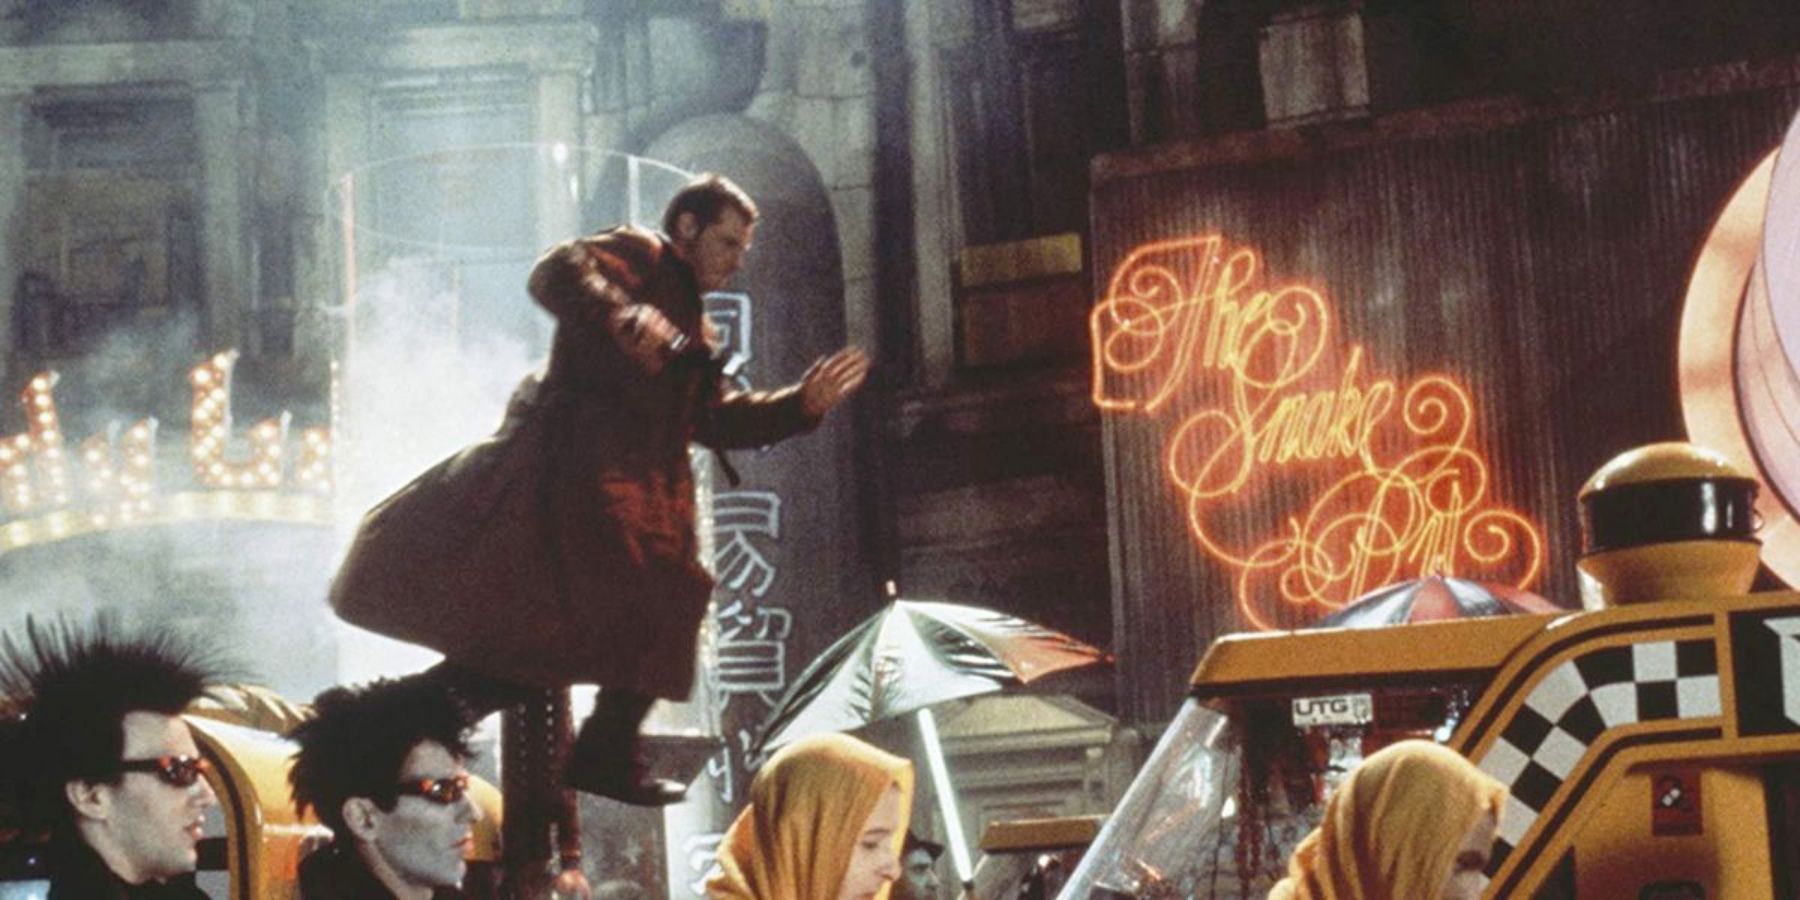 Harrison Ford plays blade runner Rick Deckard, during rush hour in LA